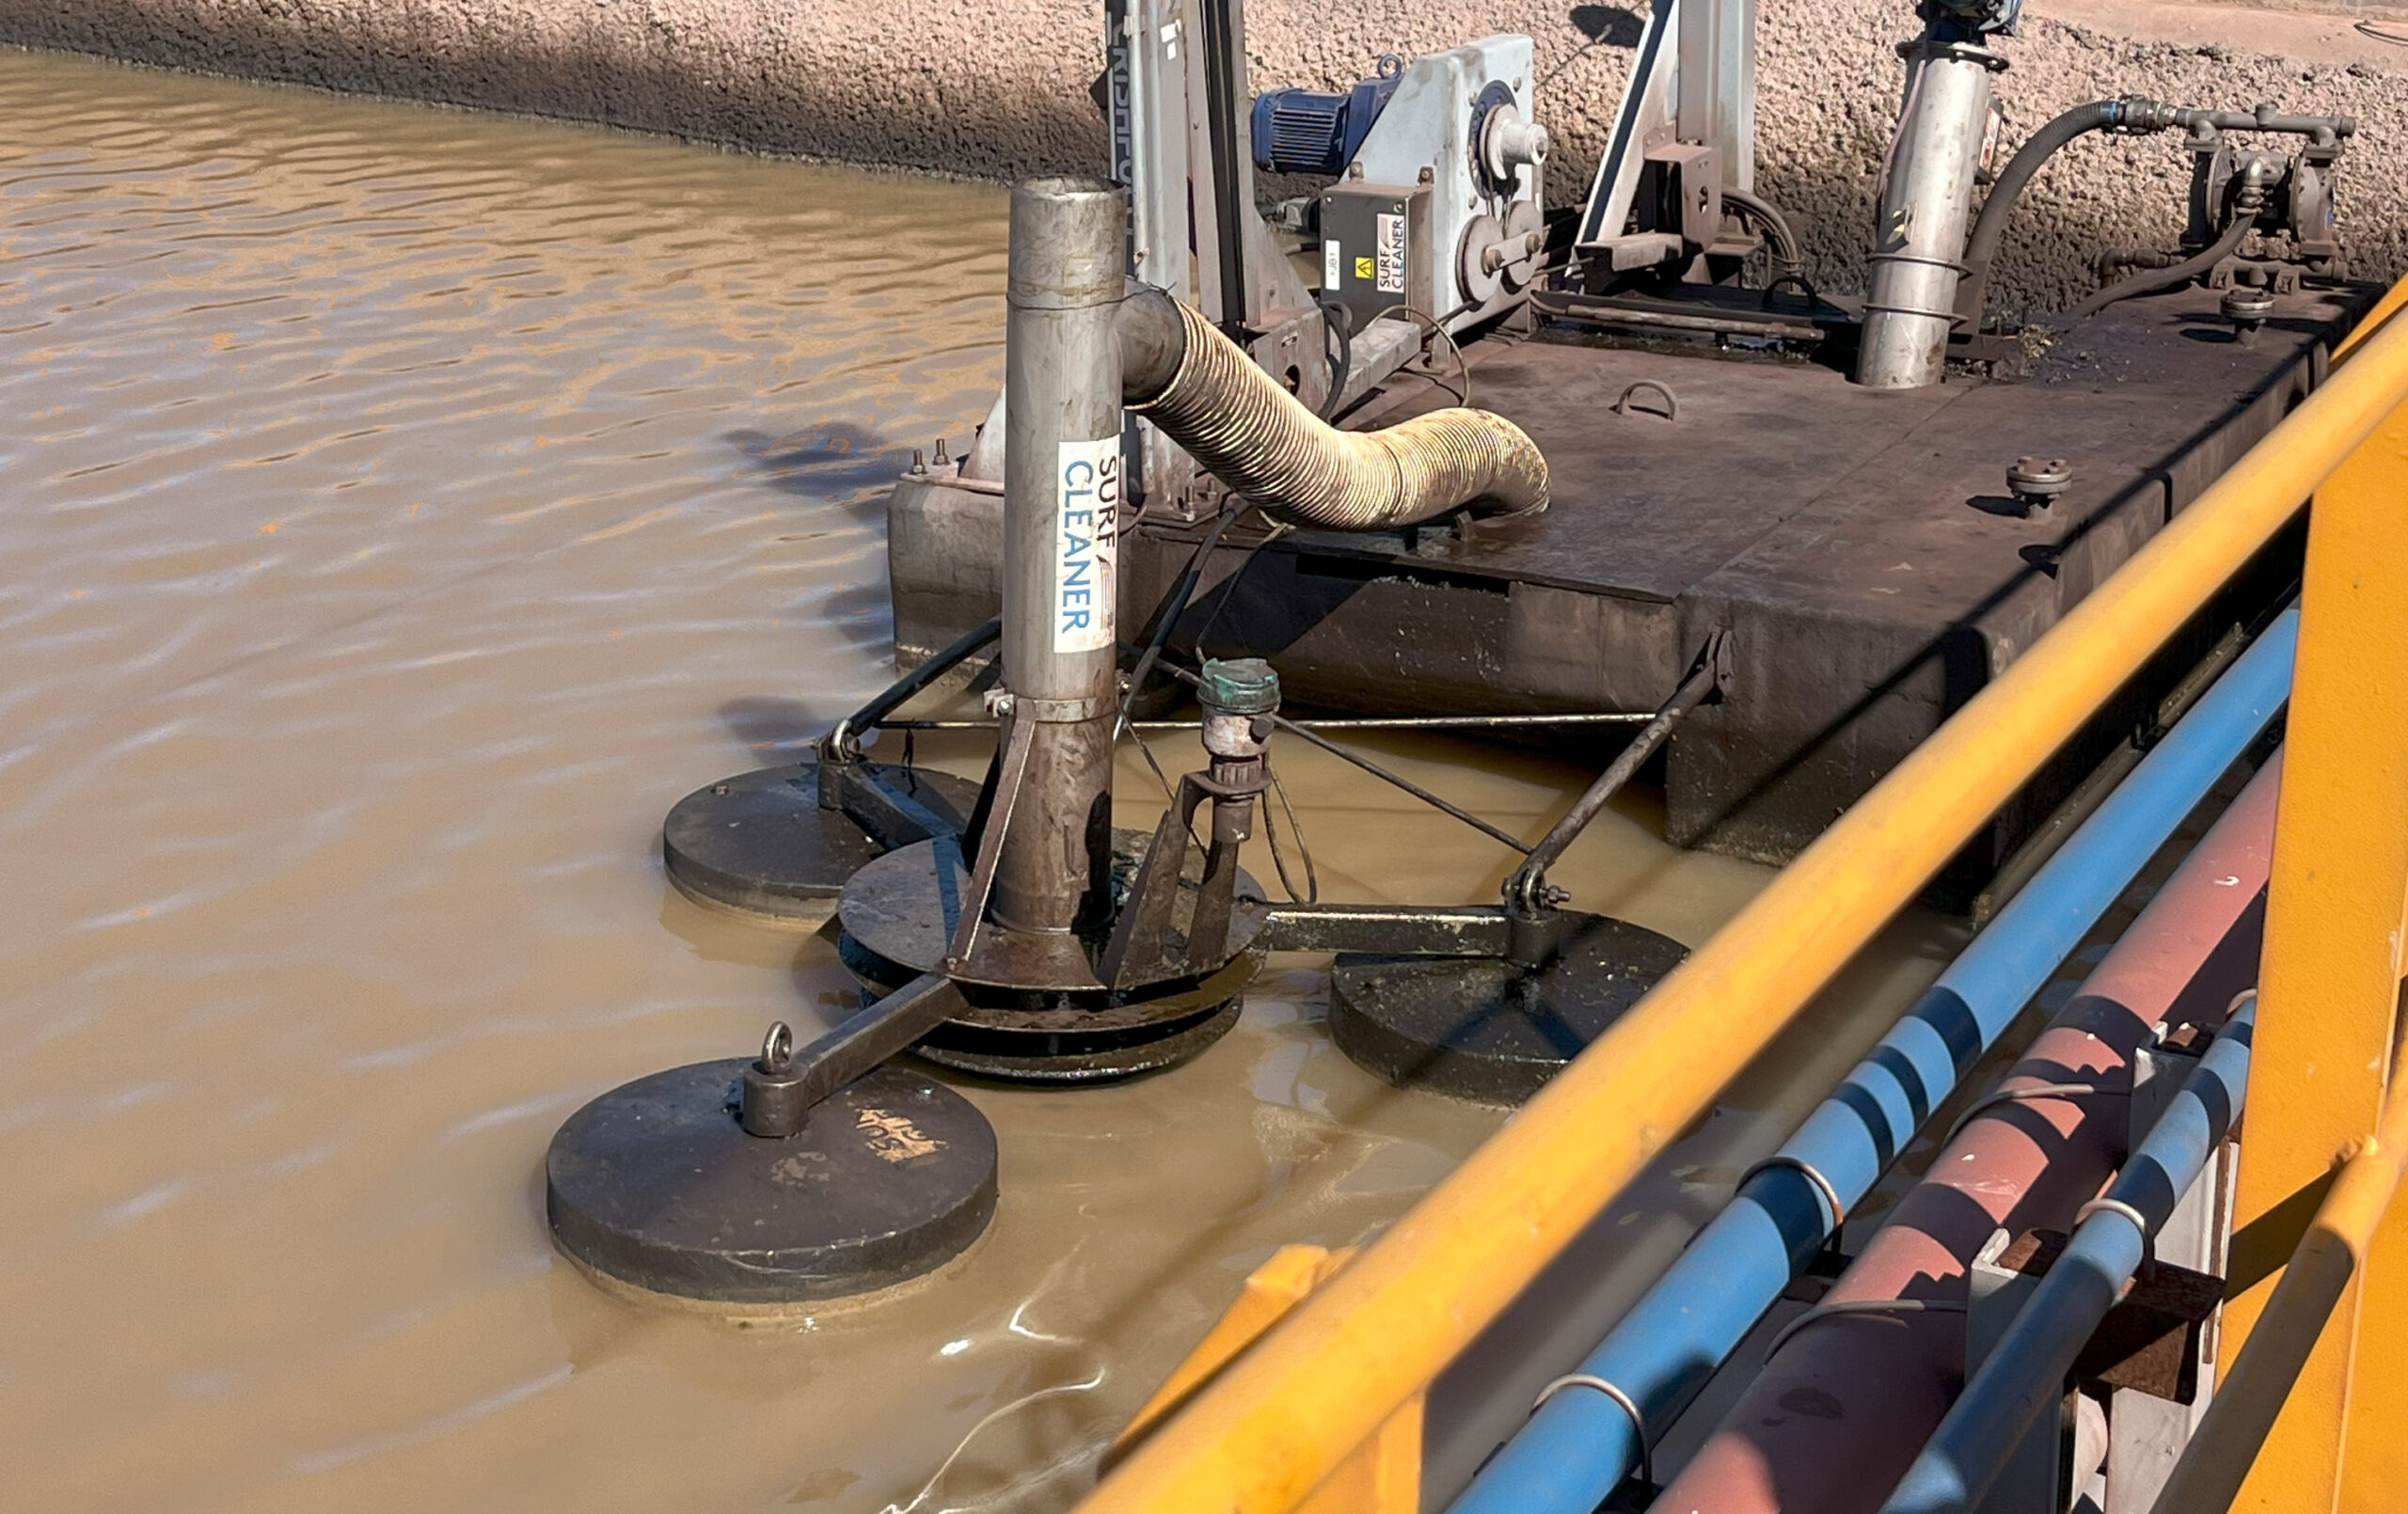 SurfCleaner SCO 8000 cleans wastewater at steel processing plant in Argentina